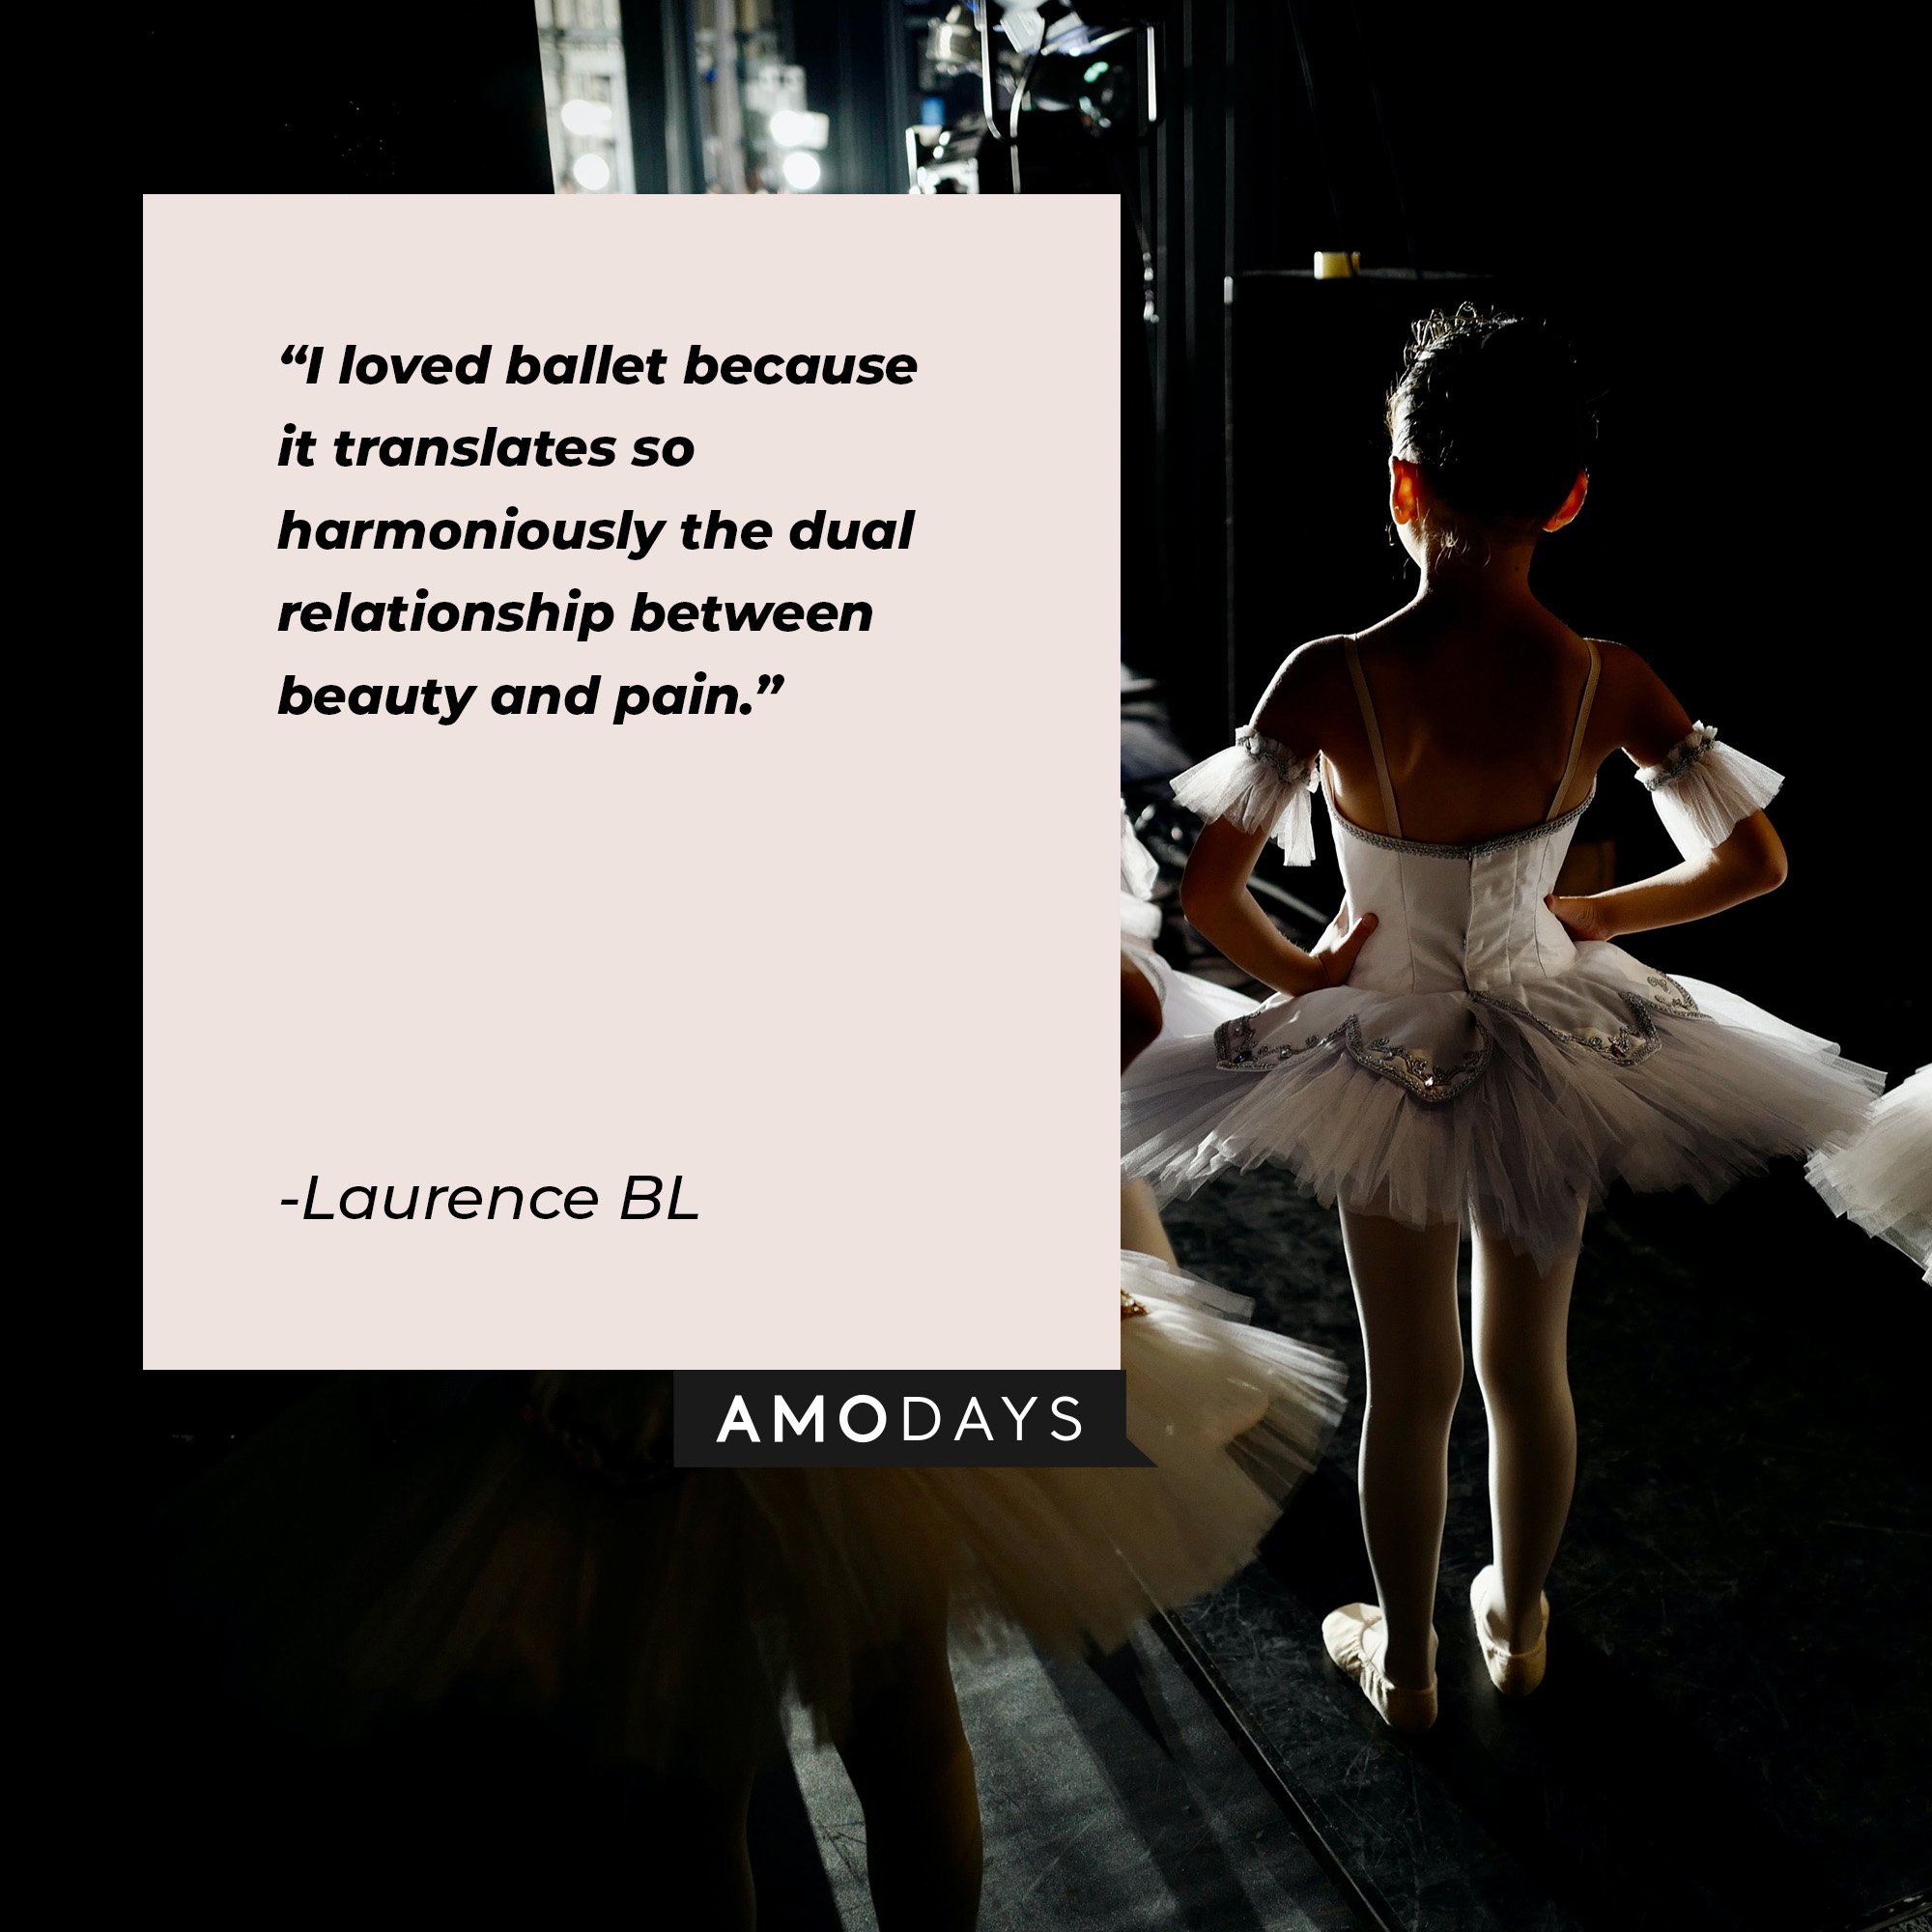  Laurence BL’s quote: “I loved ballet because it translates so harmoniously the dual relationship between beauty and pain." | Image: AmoDays